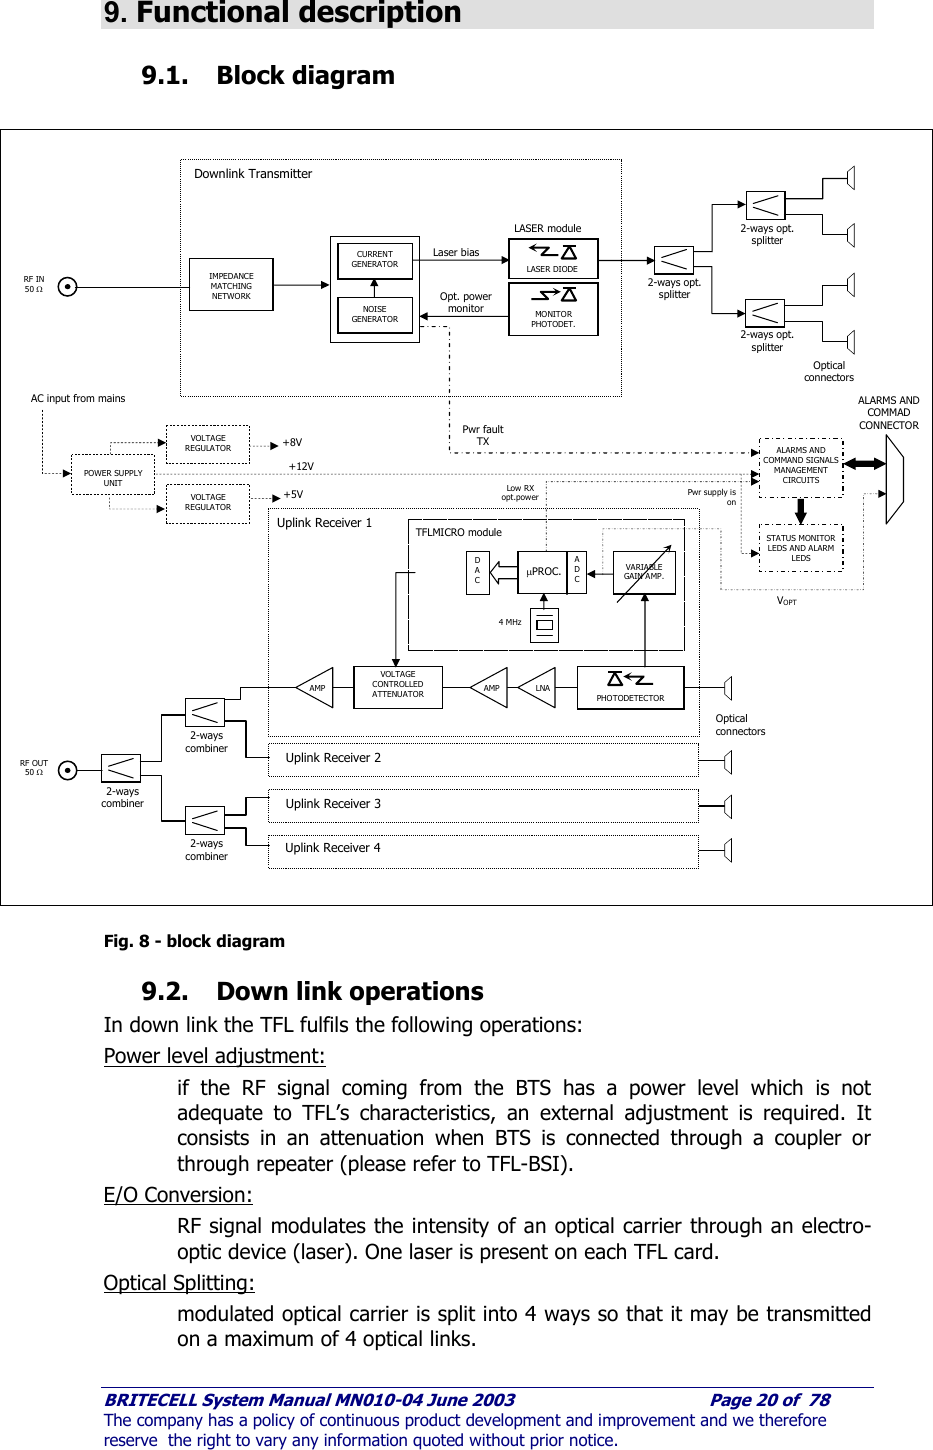     BRITECELL System Manual MN010-04 June 2003                                        Page 20 of  78 The company has a policy of continuous product development and improvement and we therefore reserve  the right to vary any information quoted without prior notice.  9. Functional description 9.1. Block diagram   Fig. 8 - block diagram 9.2. Down link operations In down link the TFL fulfils the following operations: Power level adjustment:  if the RF signal coming from the BTS has a power level which is not adequate to TFL’s characteristics, an external adjustment is required. It consists in an attenuation when BTS is connected through a coupler or through repeater (please refer to TFL-BSI). E/O Conversion:  RF signal modulates the intensity of an optical carrier through an electro-optic device (laser). One laser is present on each TFL card. Optical Splitting:  modulated optical carrier is split into 4 ways so that it may be transmitted on a maximum of 4 optical links.  RF IN 50 Ω CURRENT GENERATOR NOISE GENERATOR Laser bias Opt. power monitor IMPEDANCE MATCHING NETWORK VOPT 2-ways combiner +8V VOLTAGE REGULATOR LASER module MONITOR PHOTODET. LASER DIODE STATUS MONITOR LEDS AND ALARM LEDS ALARMS AND COMMAD CONNECTOR VOLTAGE REGULATOR 2-ways combiner VOLTAGE CONTROLLED ATTENUATOR  PHOTODETECTOR LNA AMP AMP TFLMICRO module VARIABLE GAIN AMP. 4 MHz D A C A D C µPROC. 2-ways combiner RF OUT 50 Ω Optical connectors Pwr supply is on Pwr fault  TXLow RX opt.power 2-ways opt. splitter Optical connectors POWER SUPPLY UNIT +12V Downlink Transmitter ALARMS AND COMMAND SIGNALS MANAGEMENT CIRCUITS Uplink Receiver 1 Uplink Receiver 2 Uplink Receiver 3 Uplink Receiver 4 +5V AC input from mains 2-ways opt. splitter 2-ways opt. splitter 